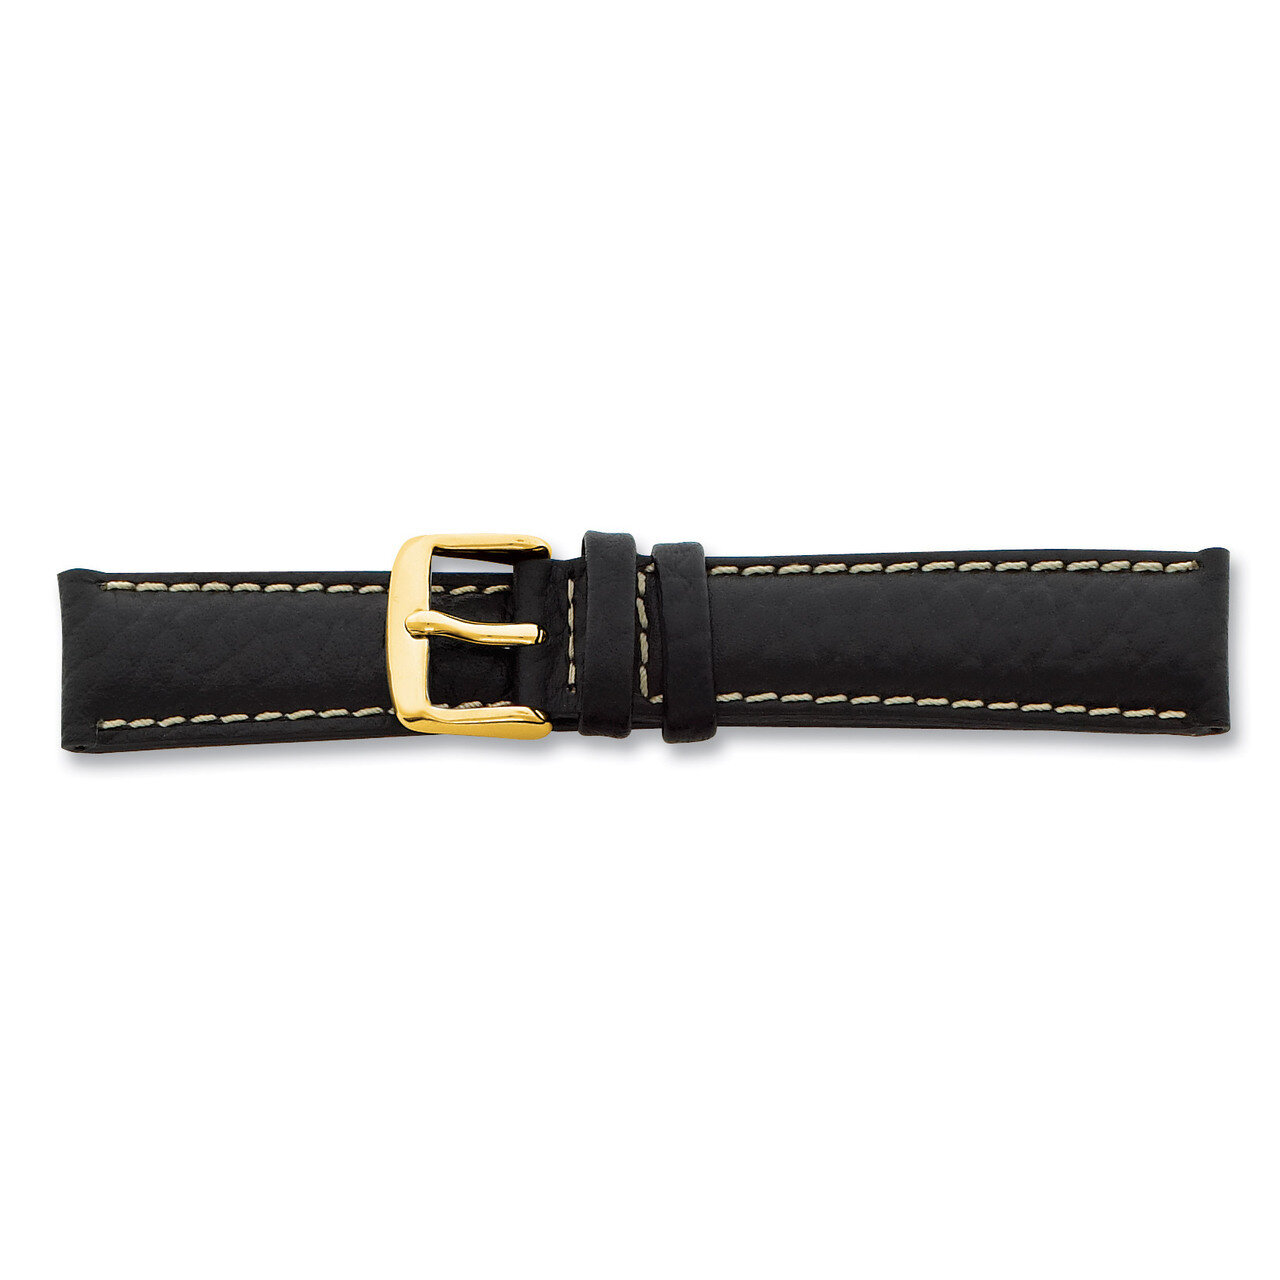 26mm Black Leather White Stitch Buckle Watch Band 7.5 Inch Gold-tone BAY99-26